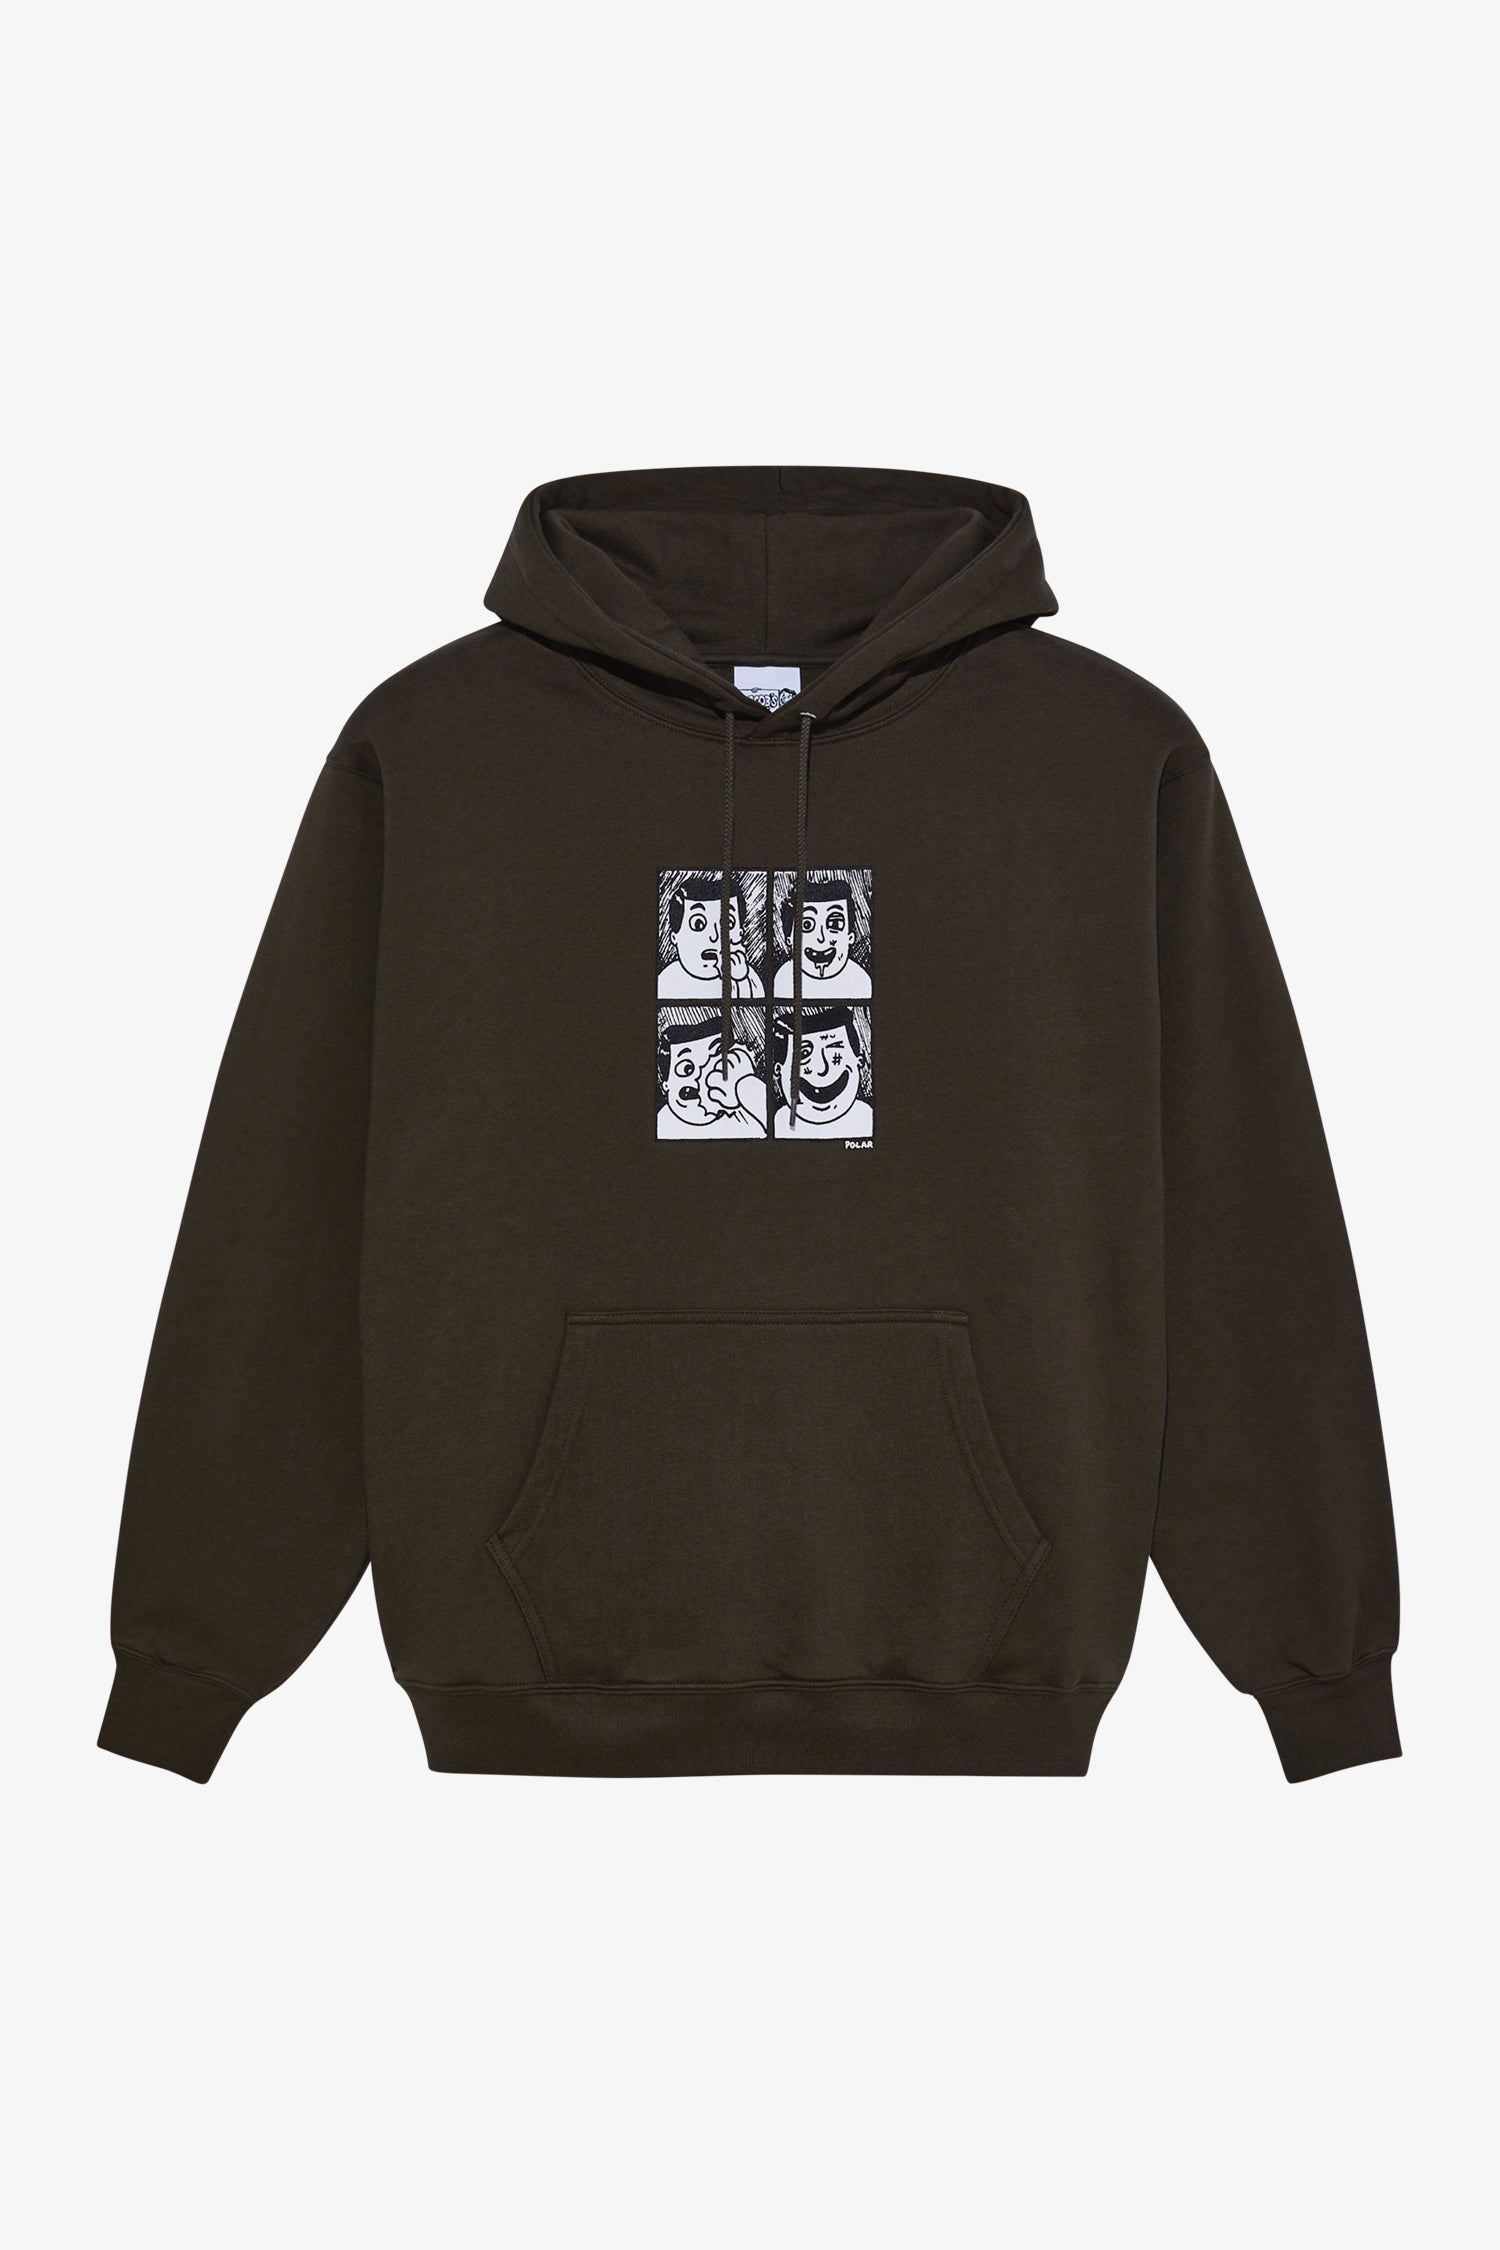 Dave "Punch" Hoodie-FRAME